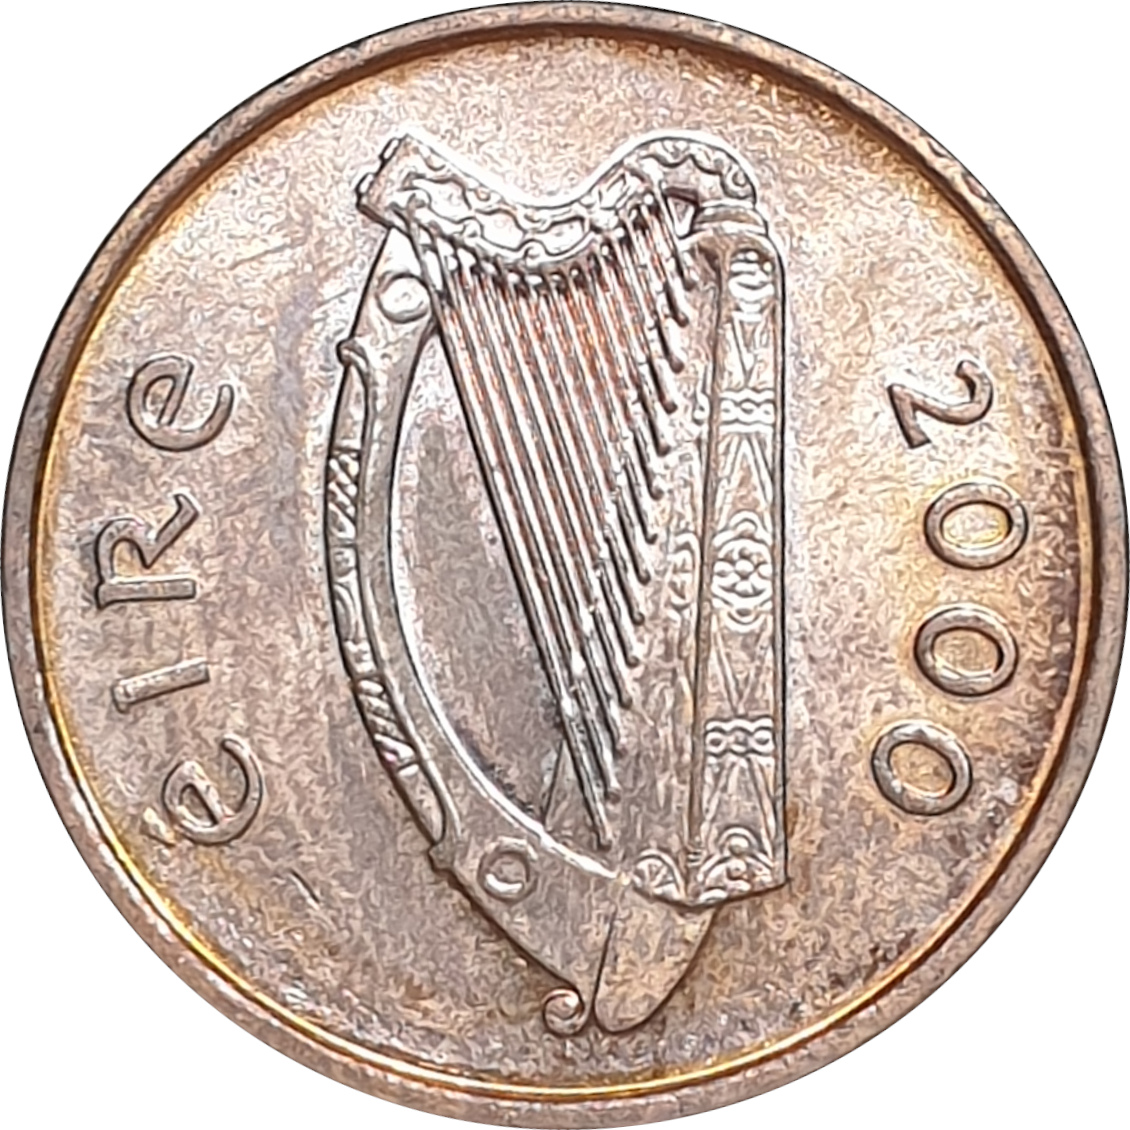 2 pence - EIRE